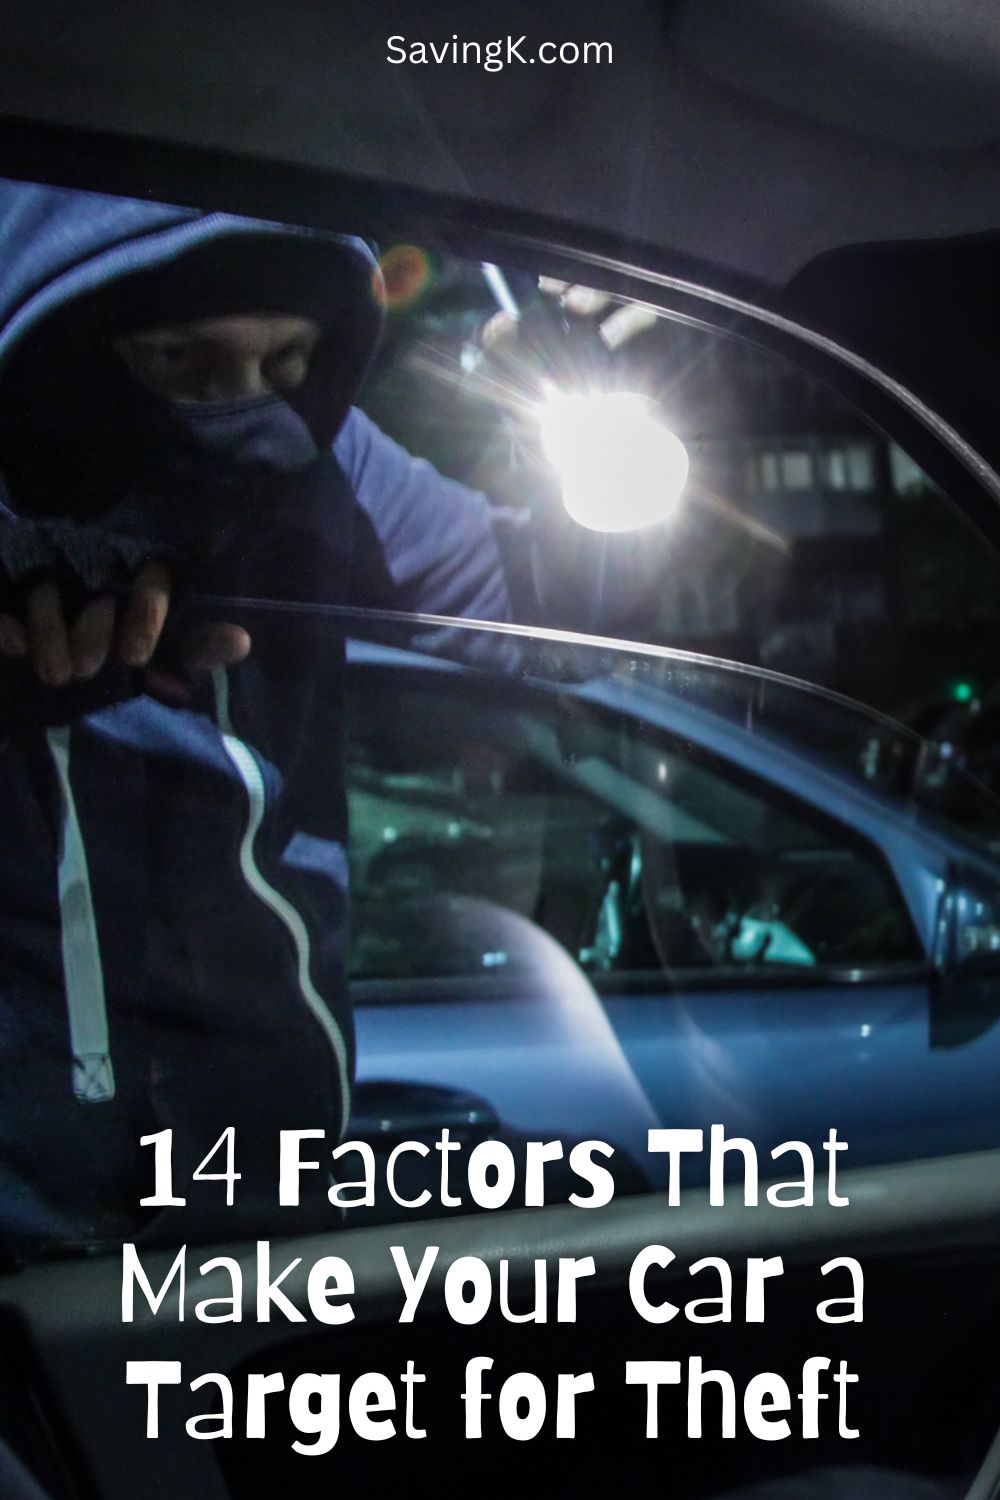 14 Factors That Make Your Car a Target for Theft